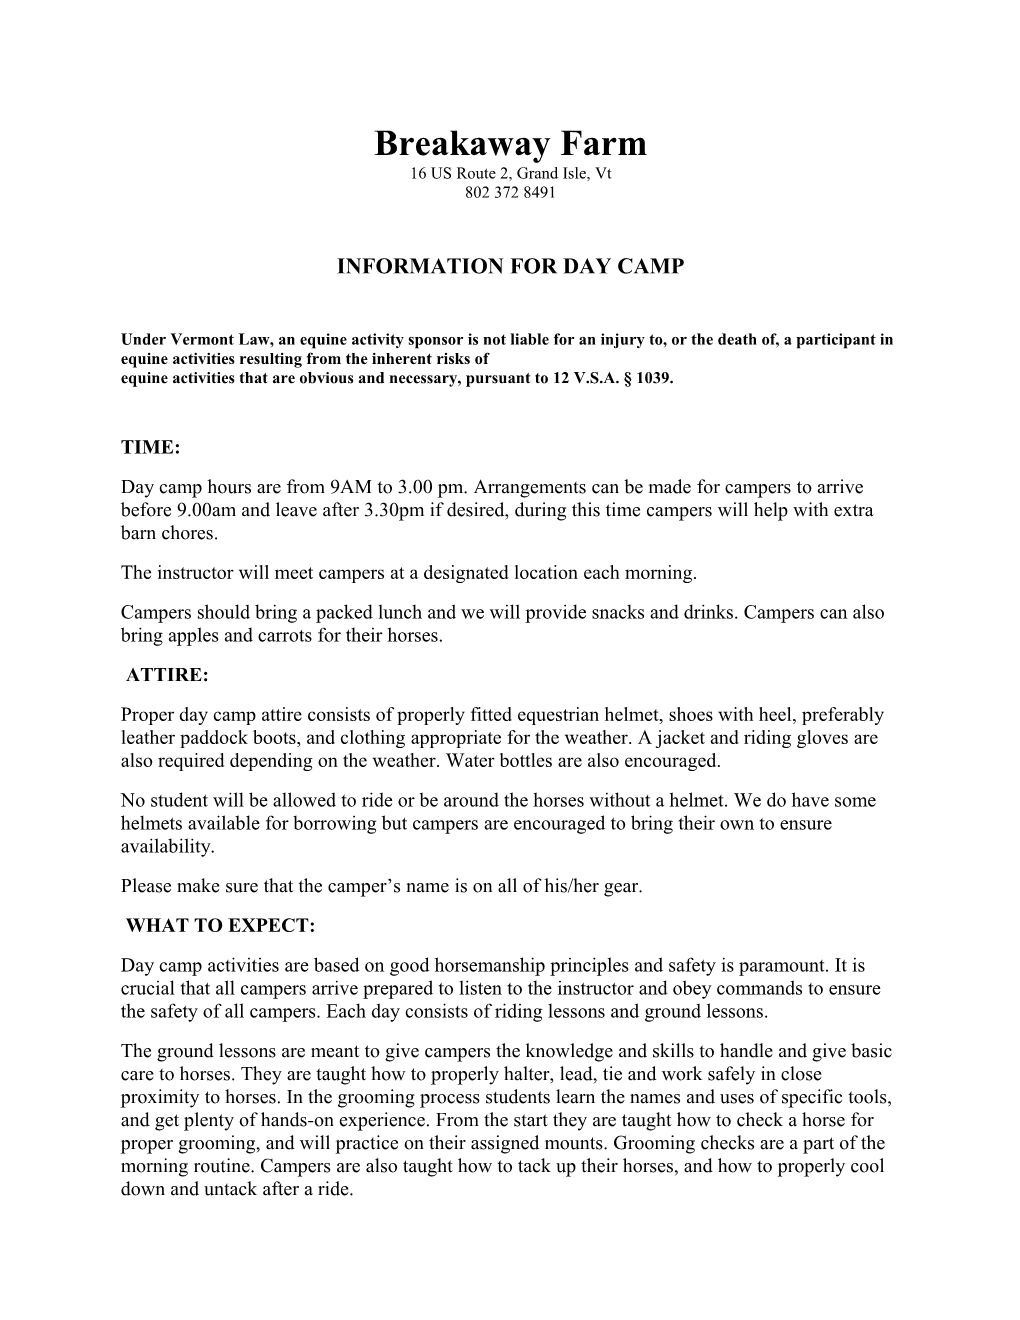 Information for Day Camp